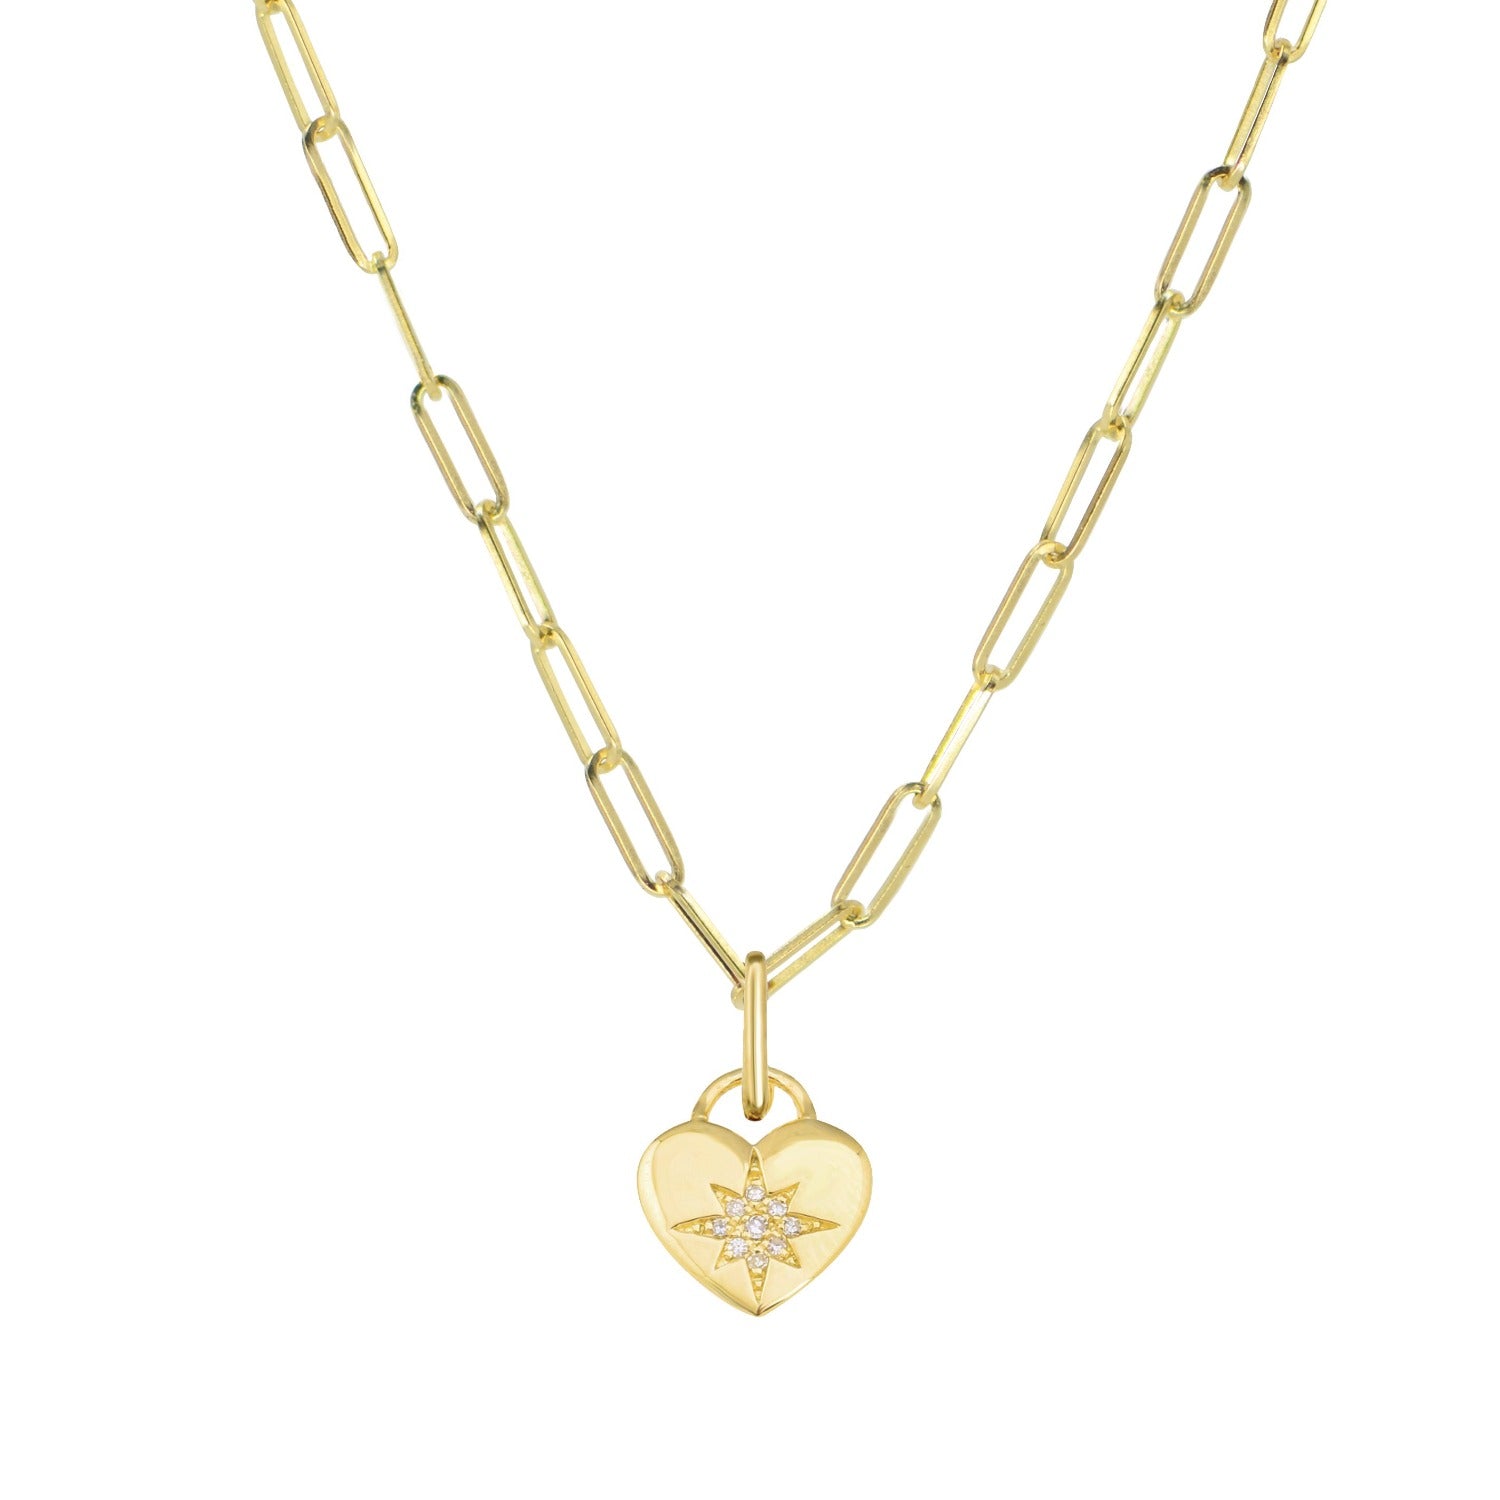 Heart Star necklace with diamonds on paperclip link chain